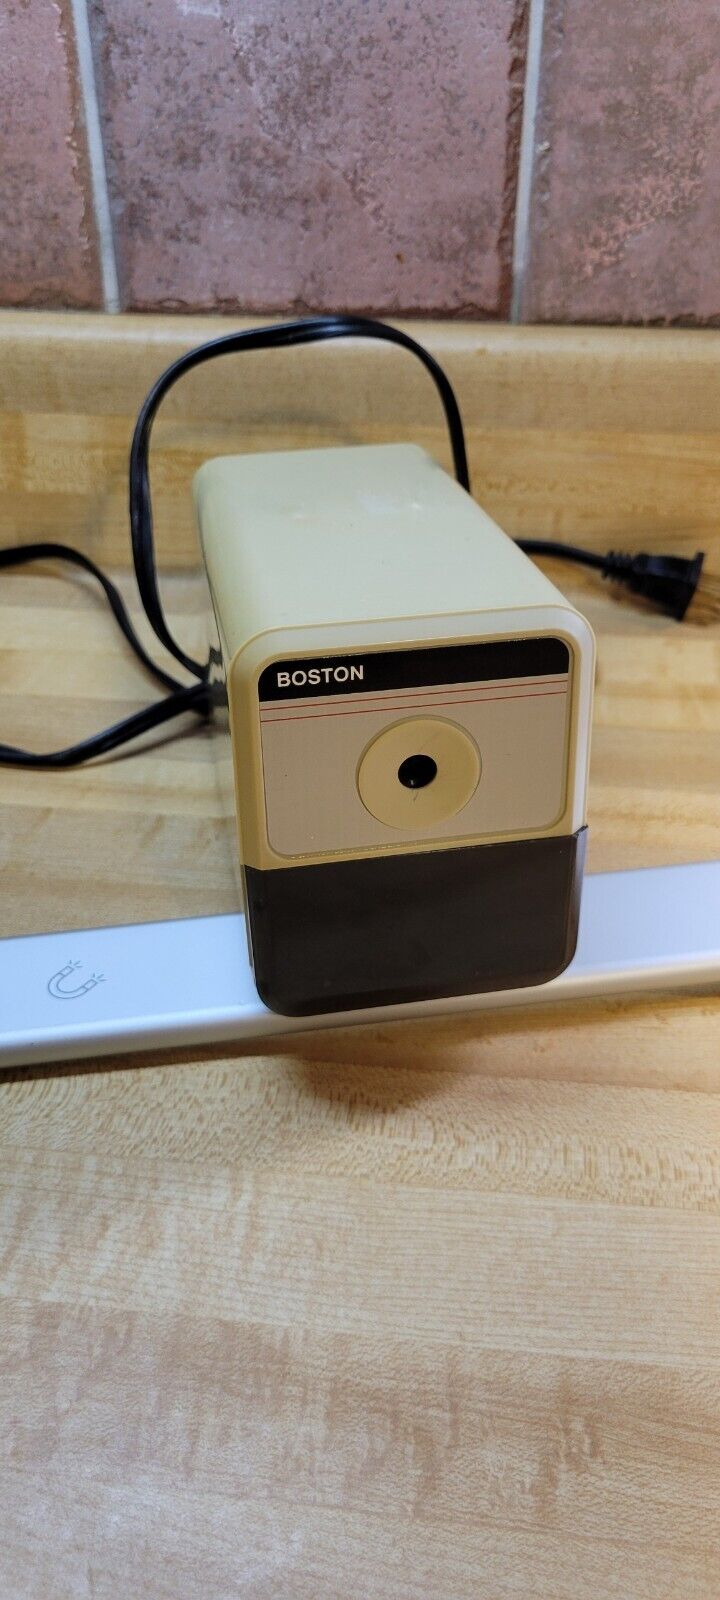 BOSTON Vintage Electric Usa Pencil Sharpener Model 18 Tested And Works Fairly